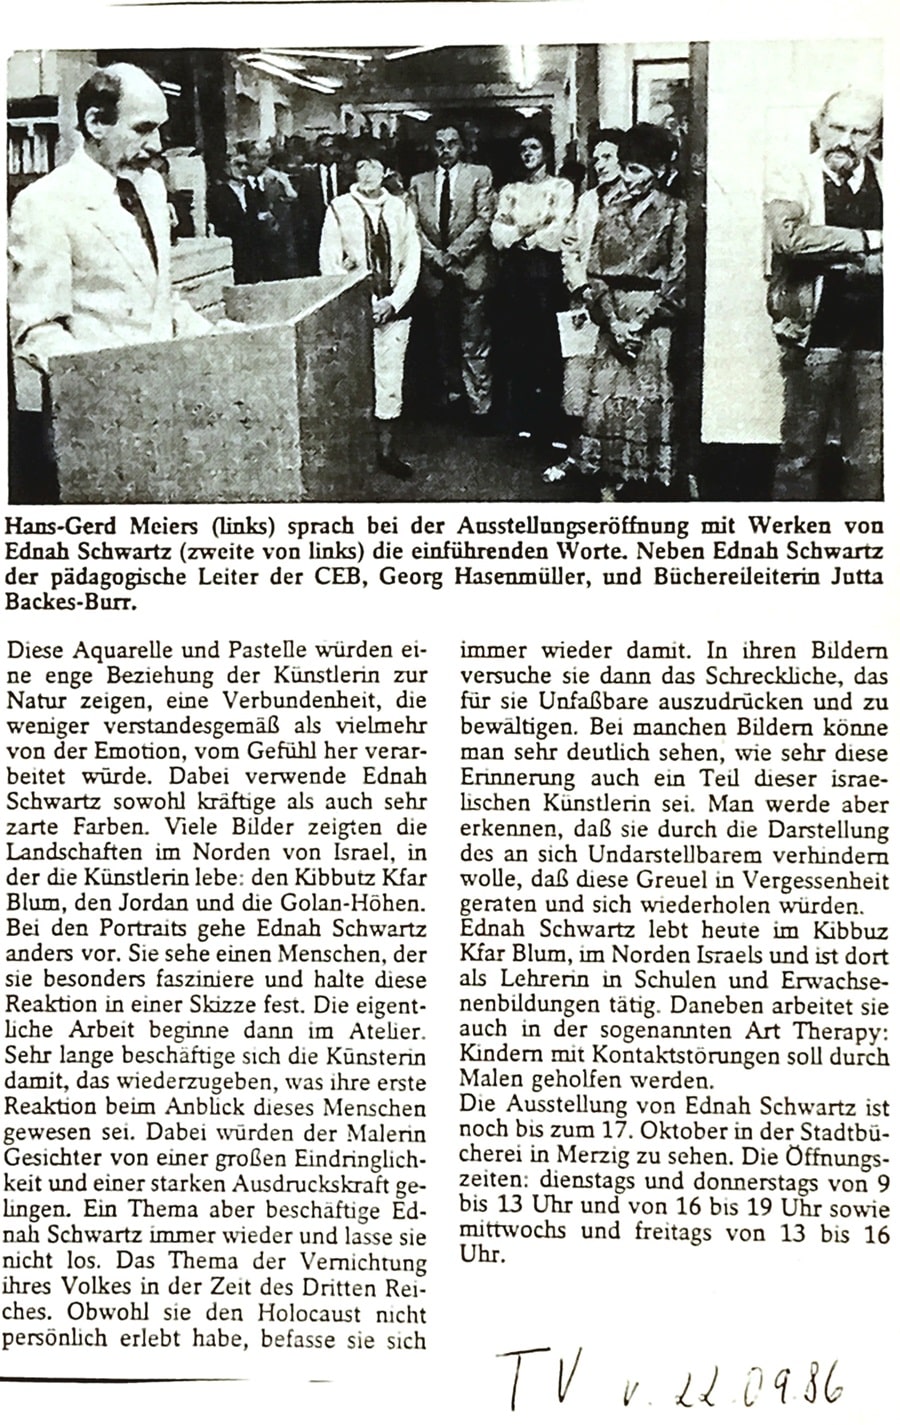 News Clipping of Hans-Gerd Meirs Speaking At The Opening Of The Exhibit of Artist Ednah Sarah Schwartz